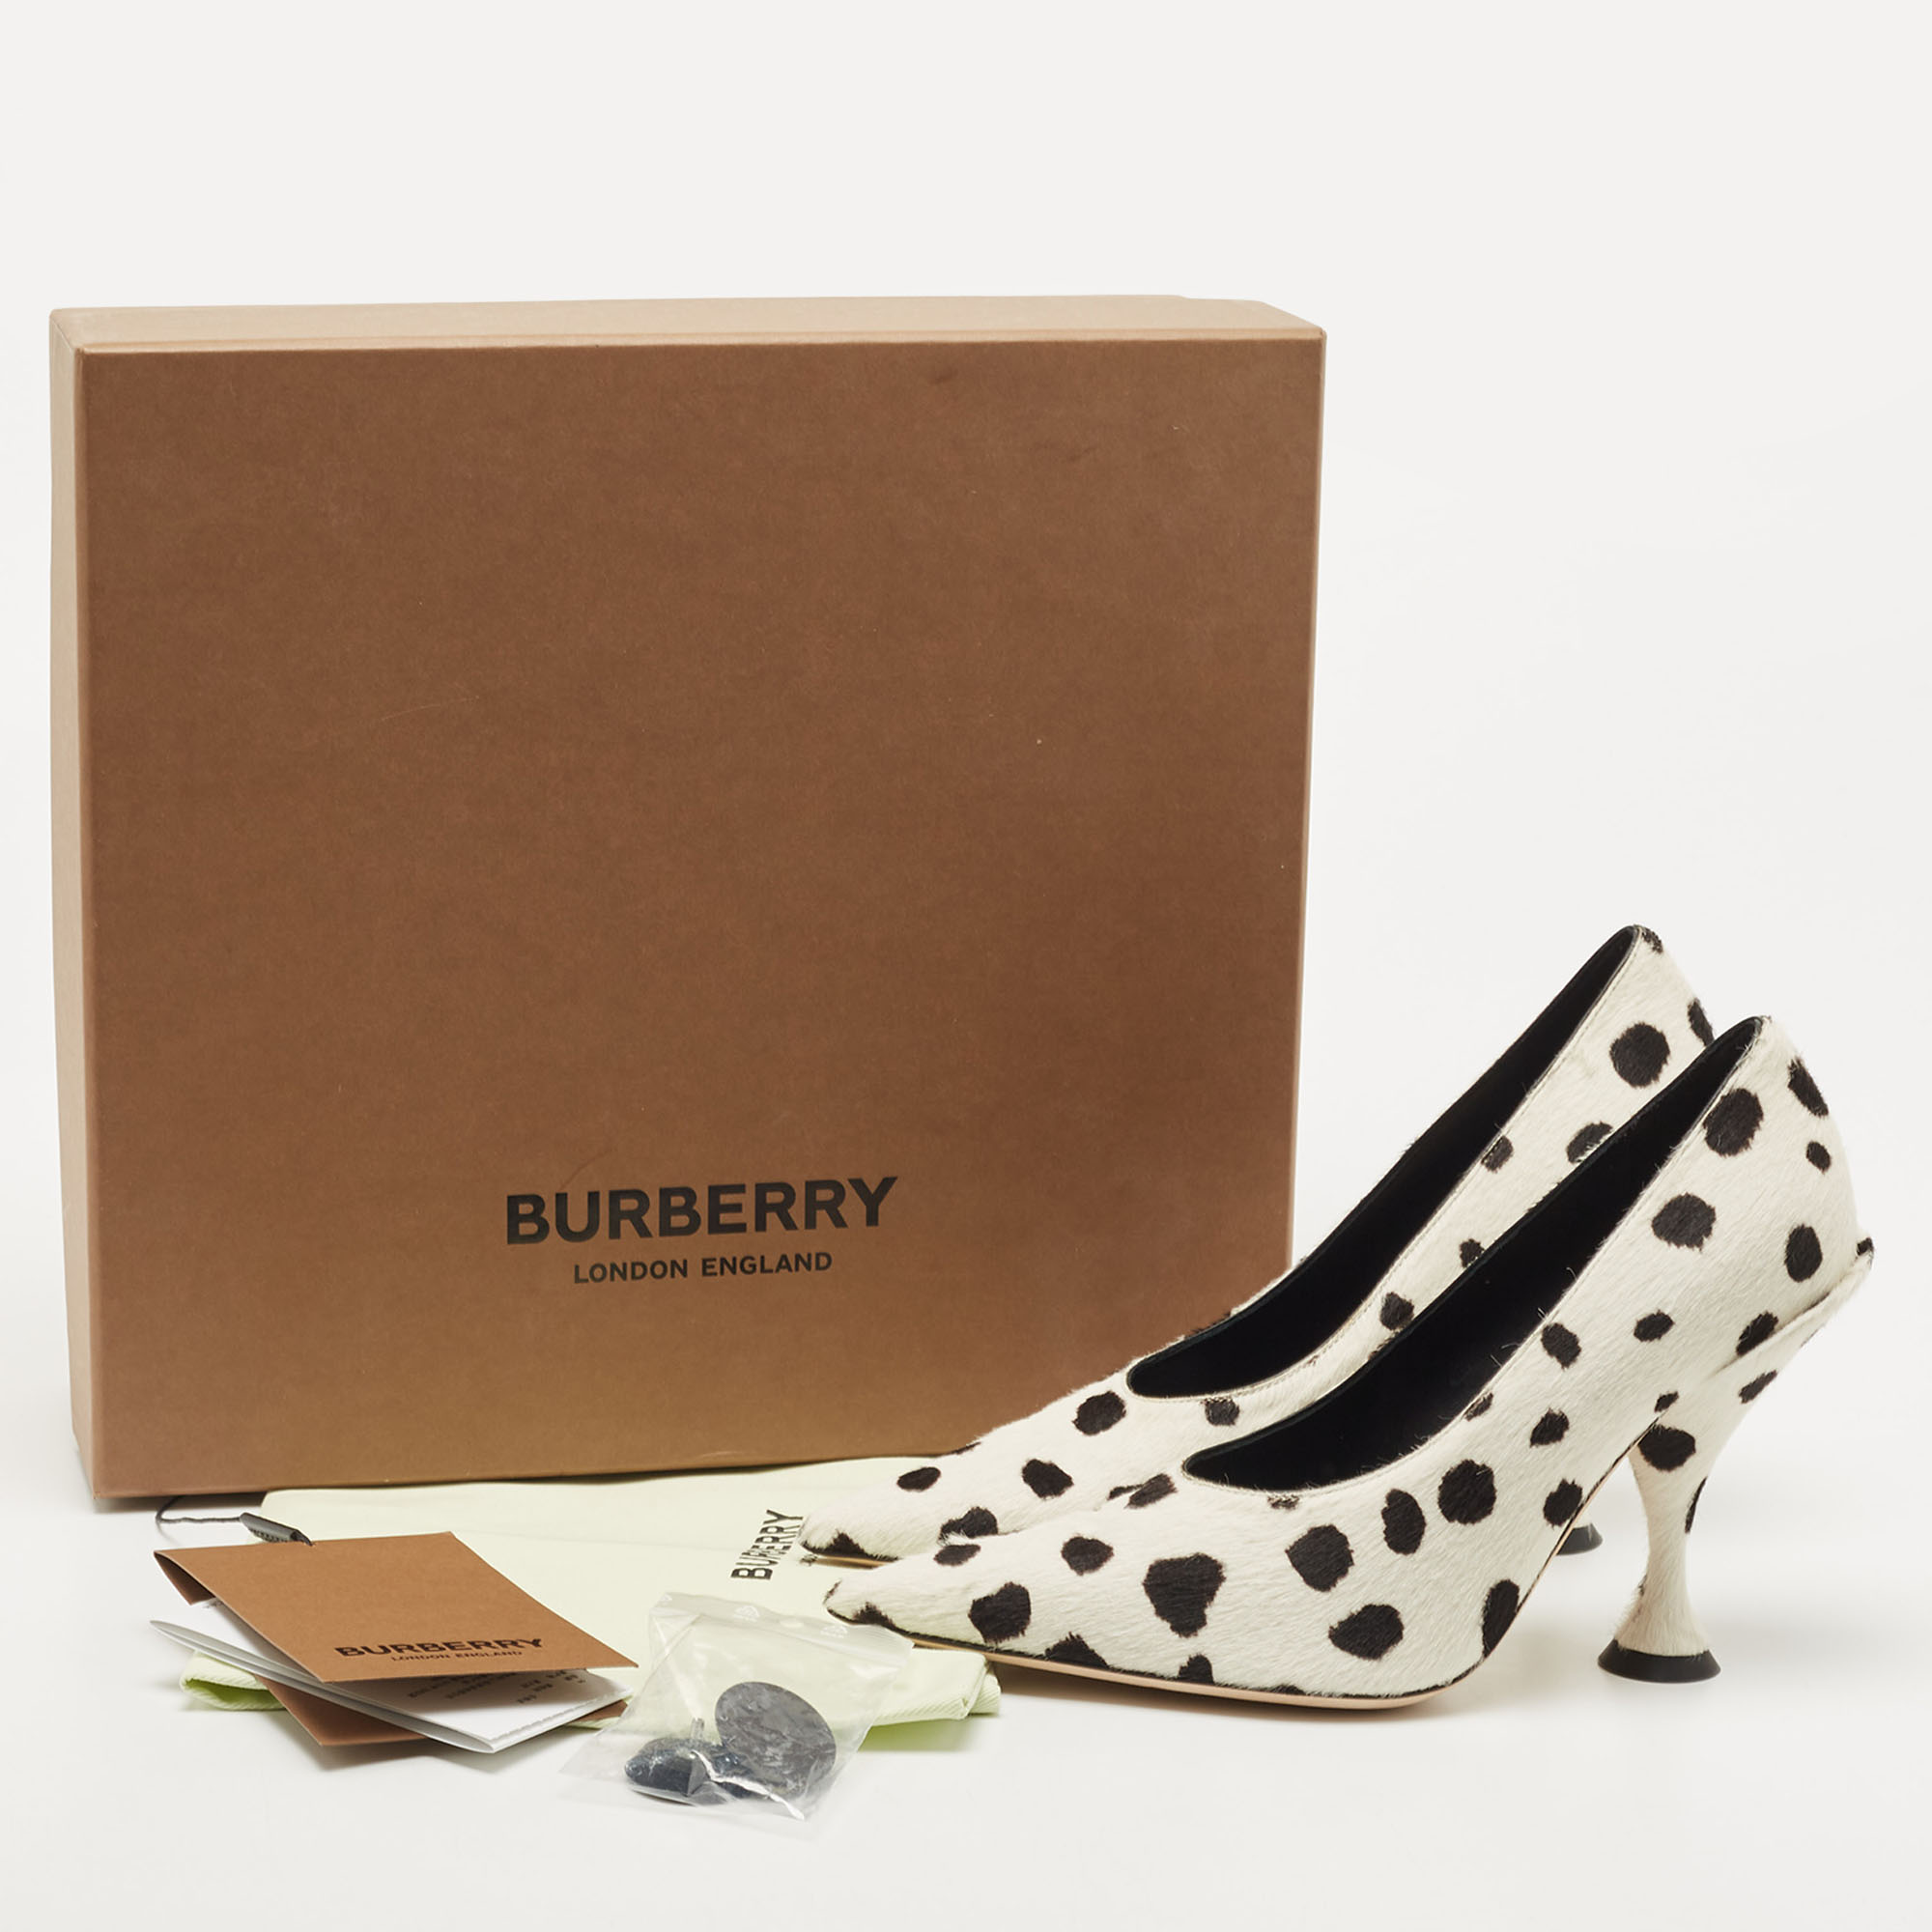 Burberry Black/White Calf Hair Ava Pointed Toe Pumps Size 36